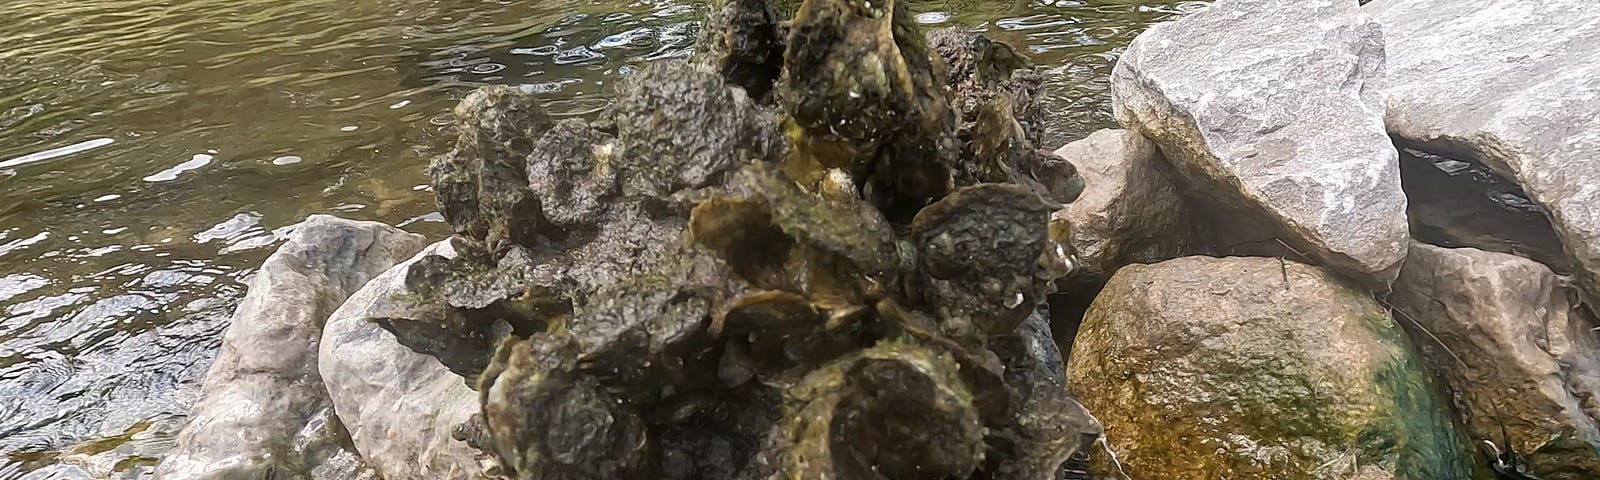 oysters growing on limestone